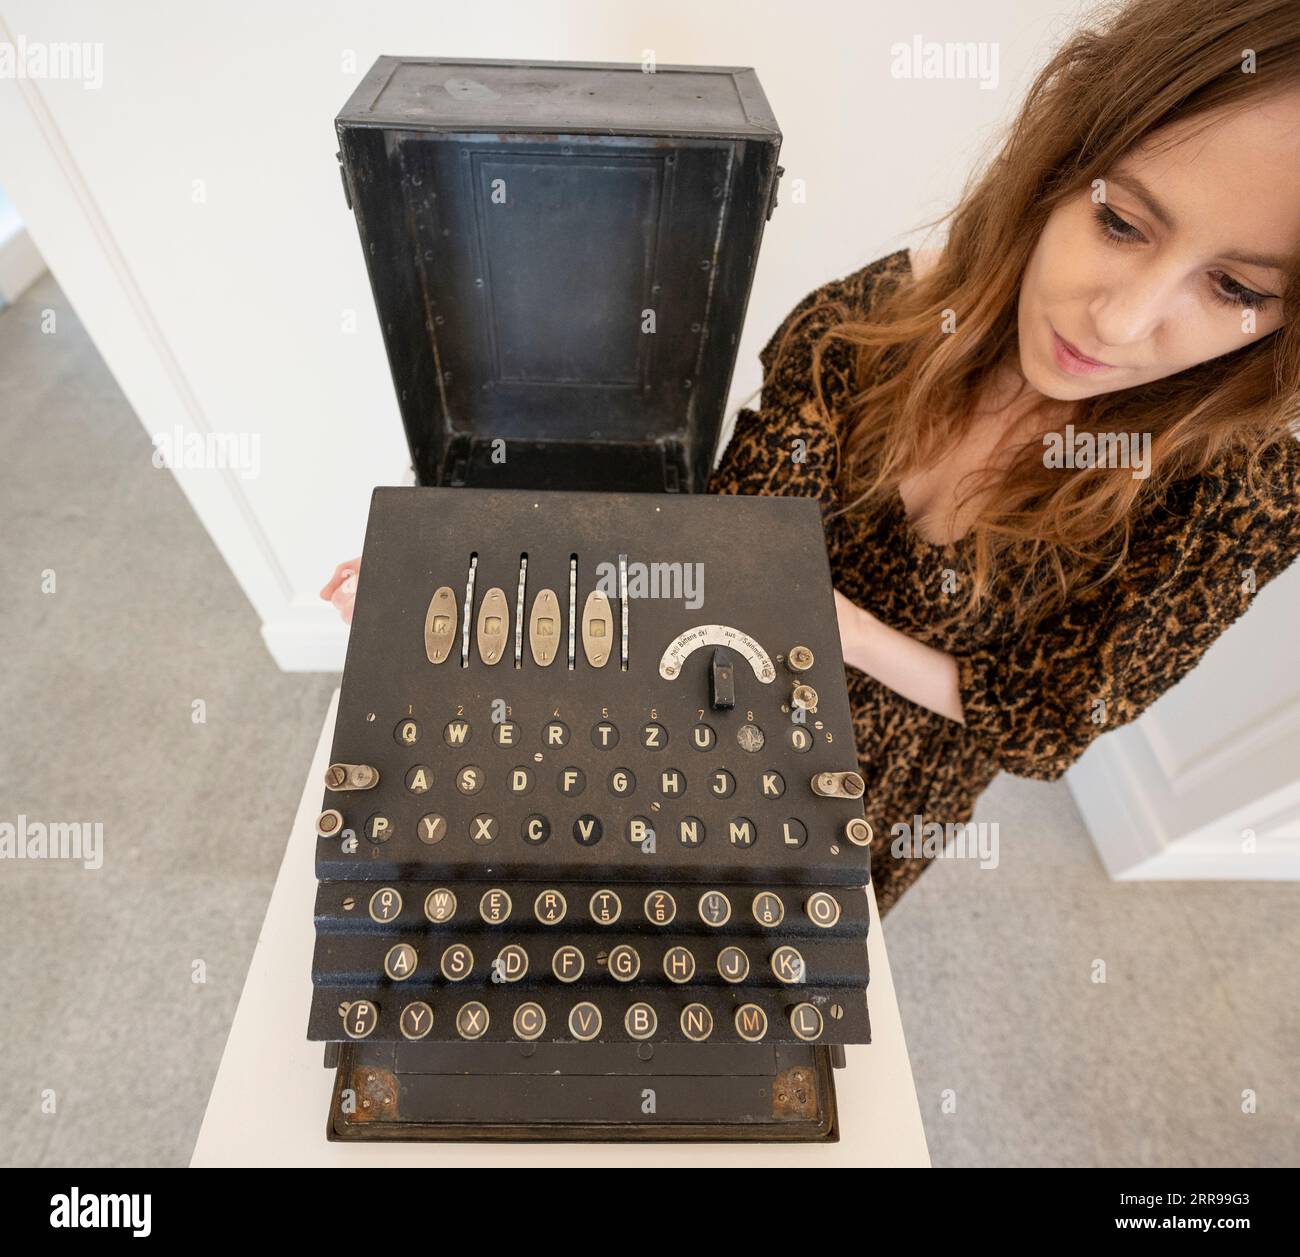 Bonhams Knightsbridge, London, UK. 7th Sep, 2023. Instruments of Science and Technology Online sale at Bonhams includes 'The Railway Enigma': A Very Rare Heimsoeth & Rinke K-Model Enigma Cipher Machine, German, c.1940, numbered K438 on the base and rotors. Estimate: £80,000-120,000. Credit: Malcolm Park/Alamy Live News Stock Photo